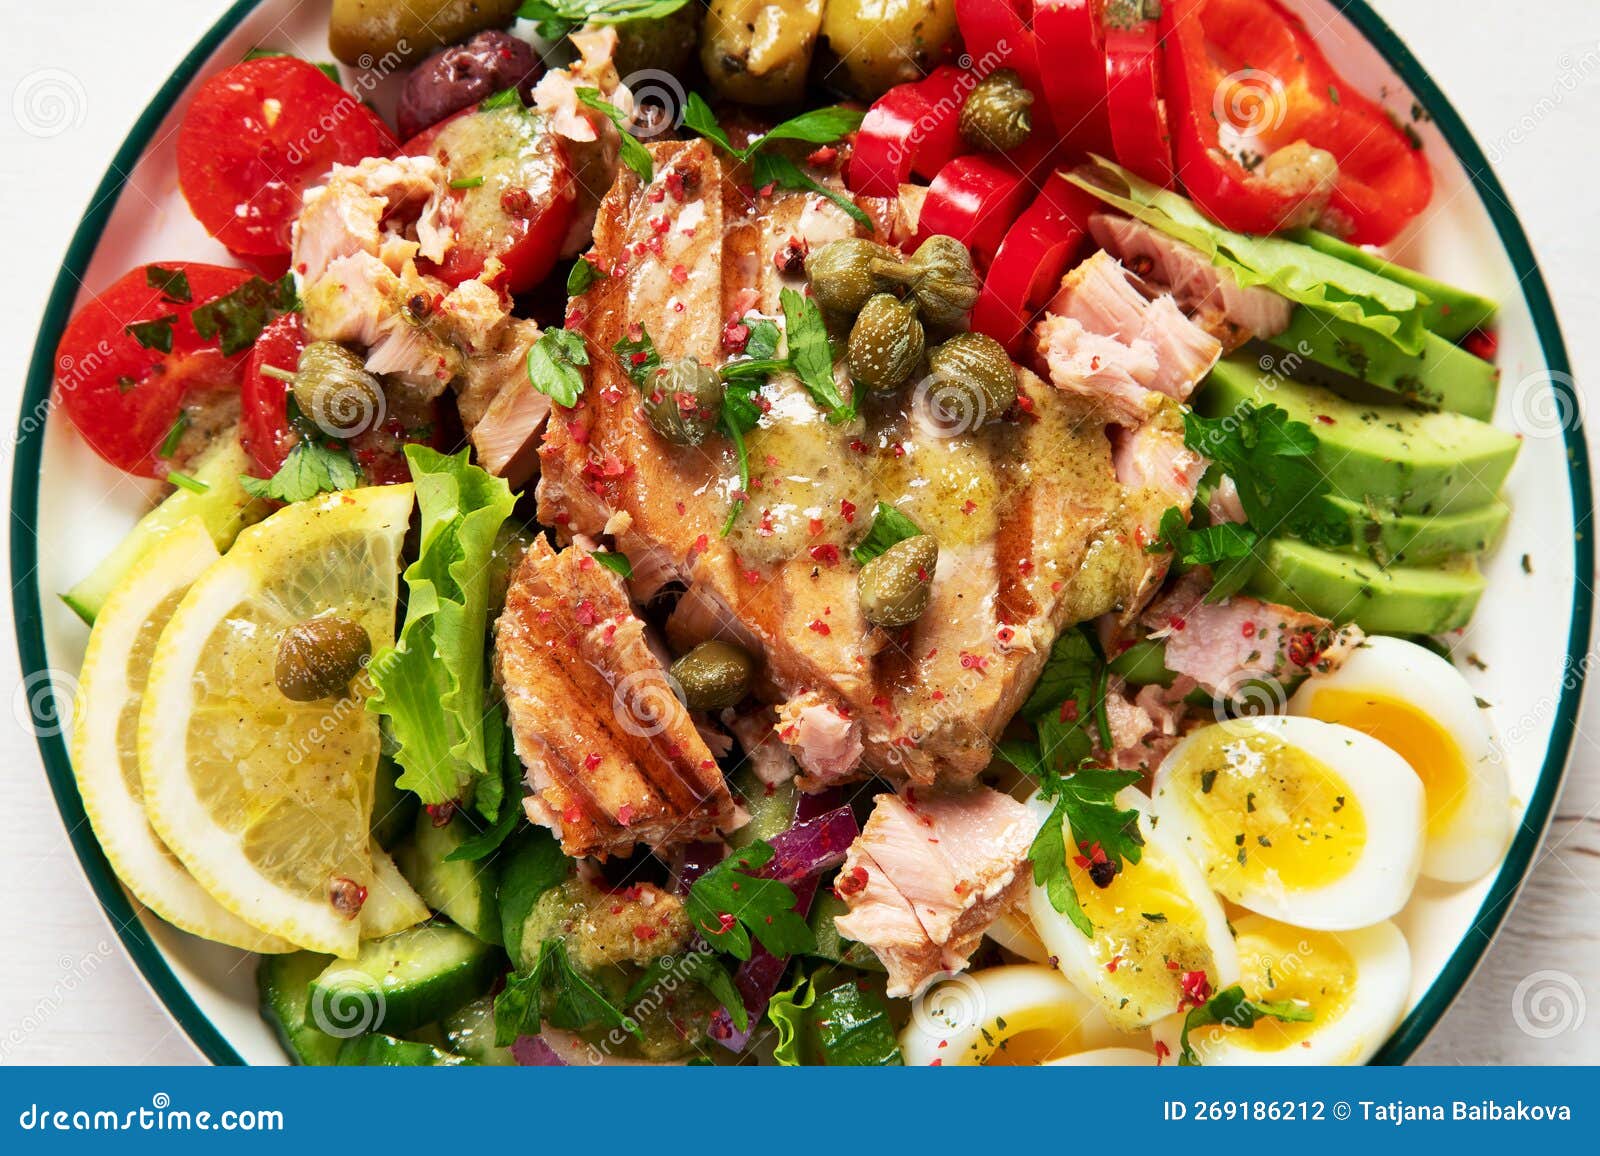 Tuna Salad with Lettuce, Eggs and Tomatoes Stock Photo - Image of ...